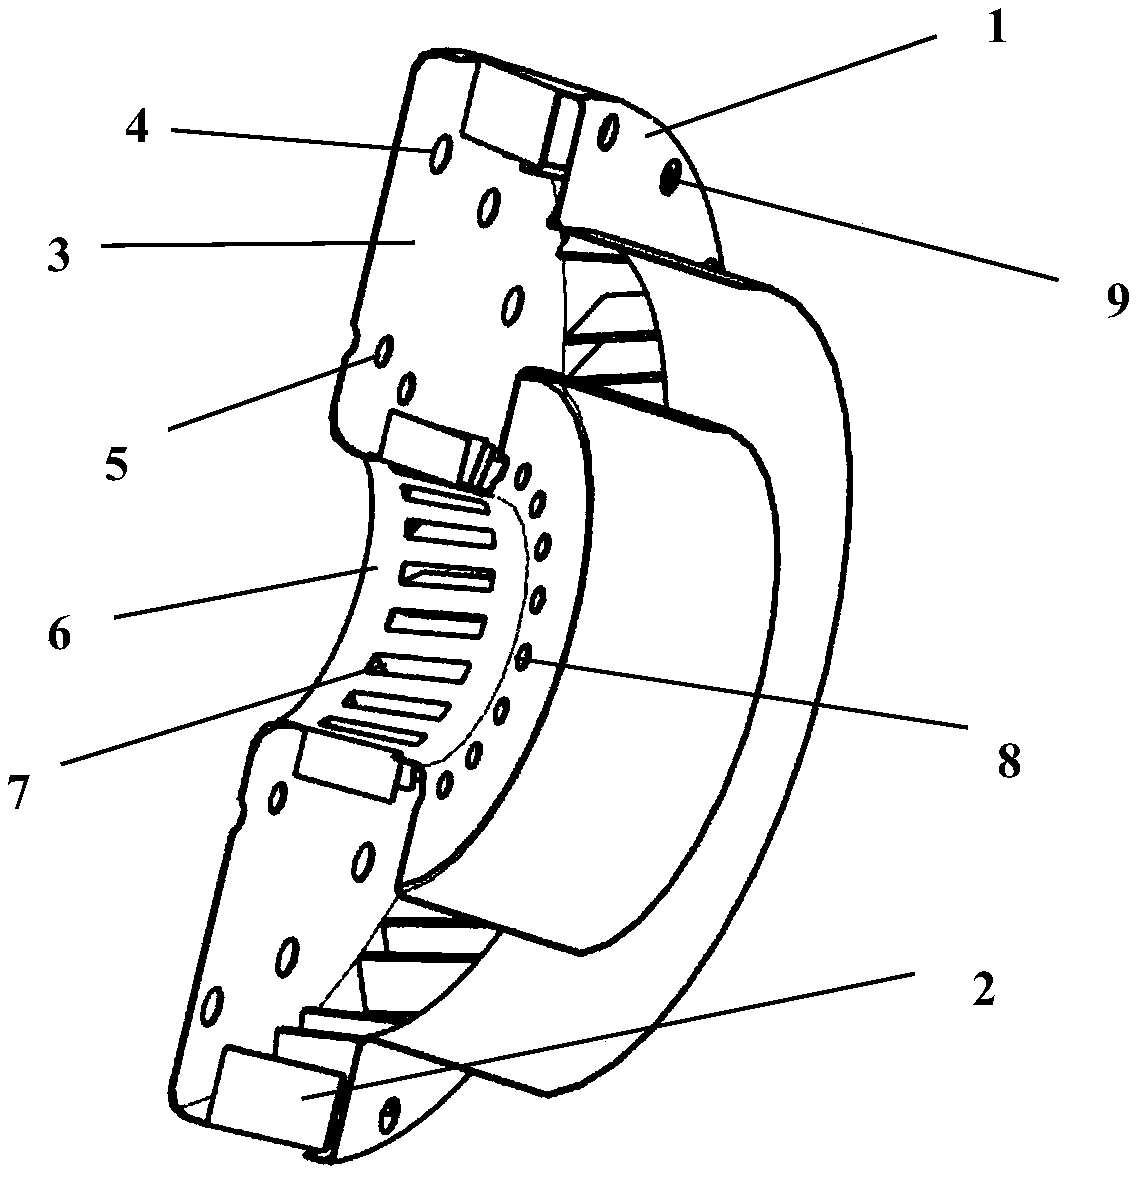 Swirl trapped vortex type combustion chamber of micro-turbine engine